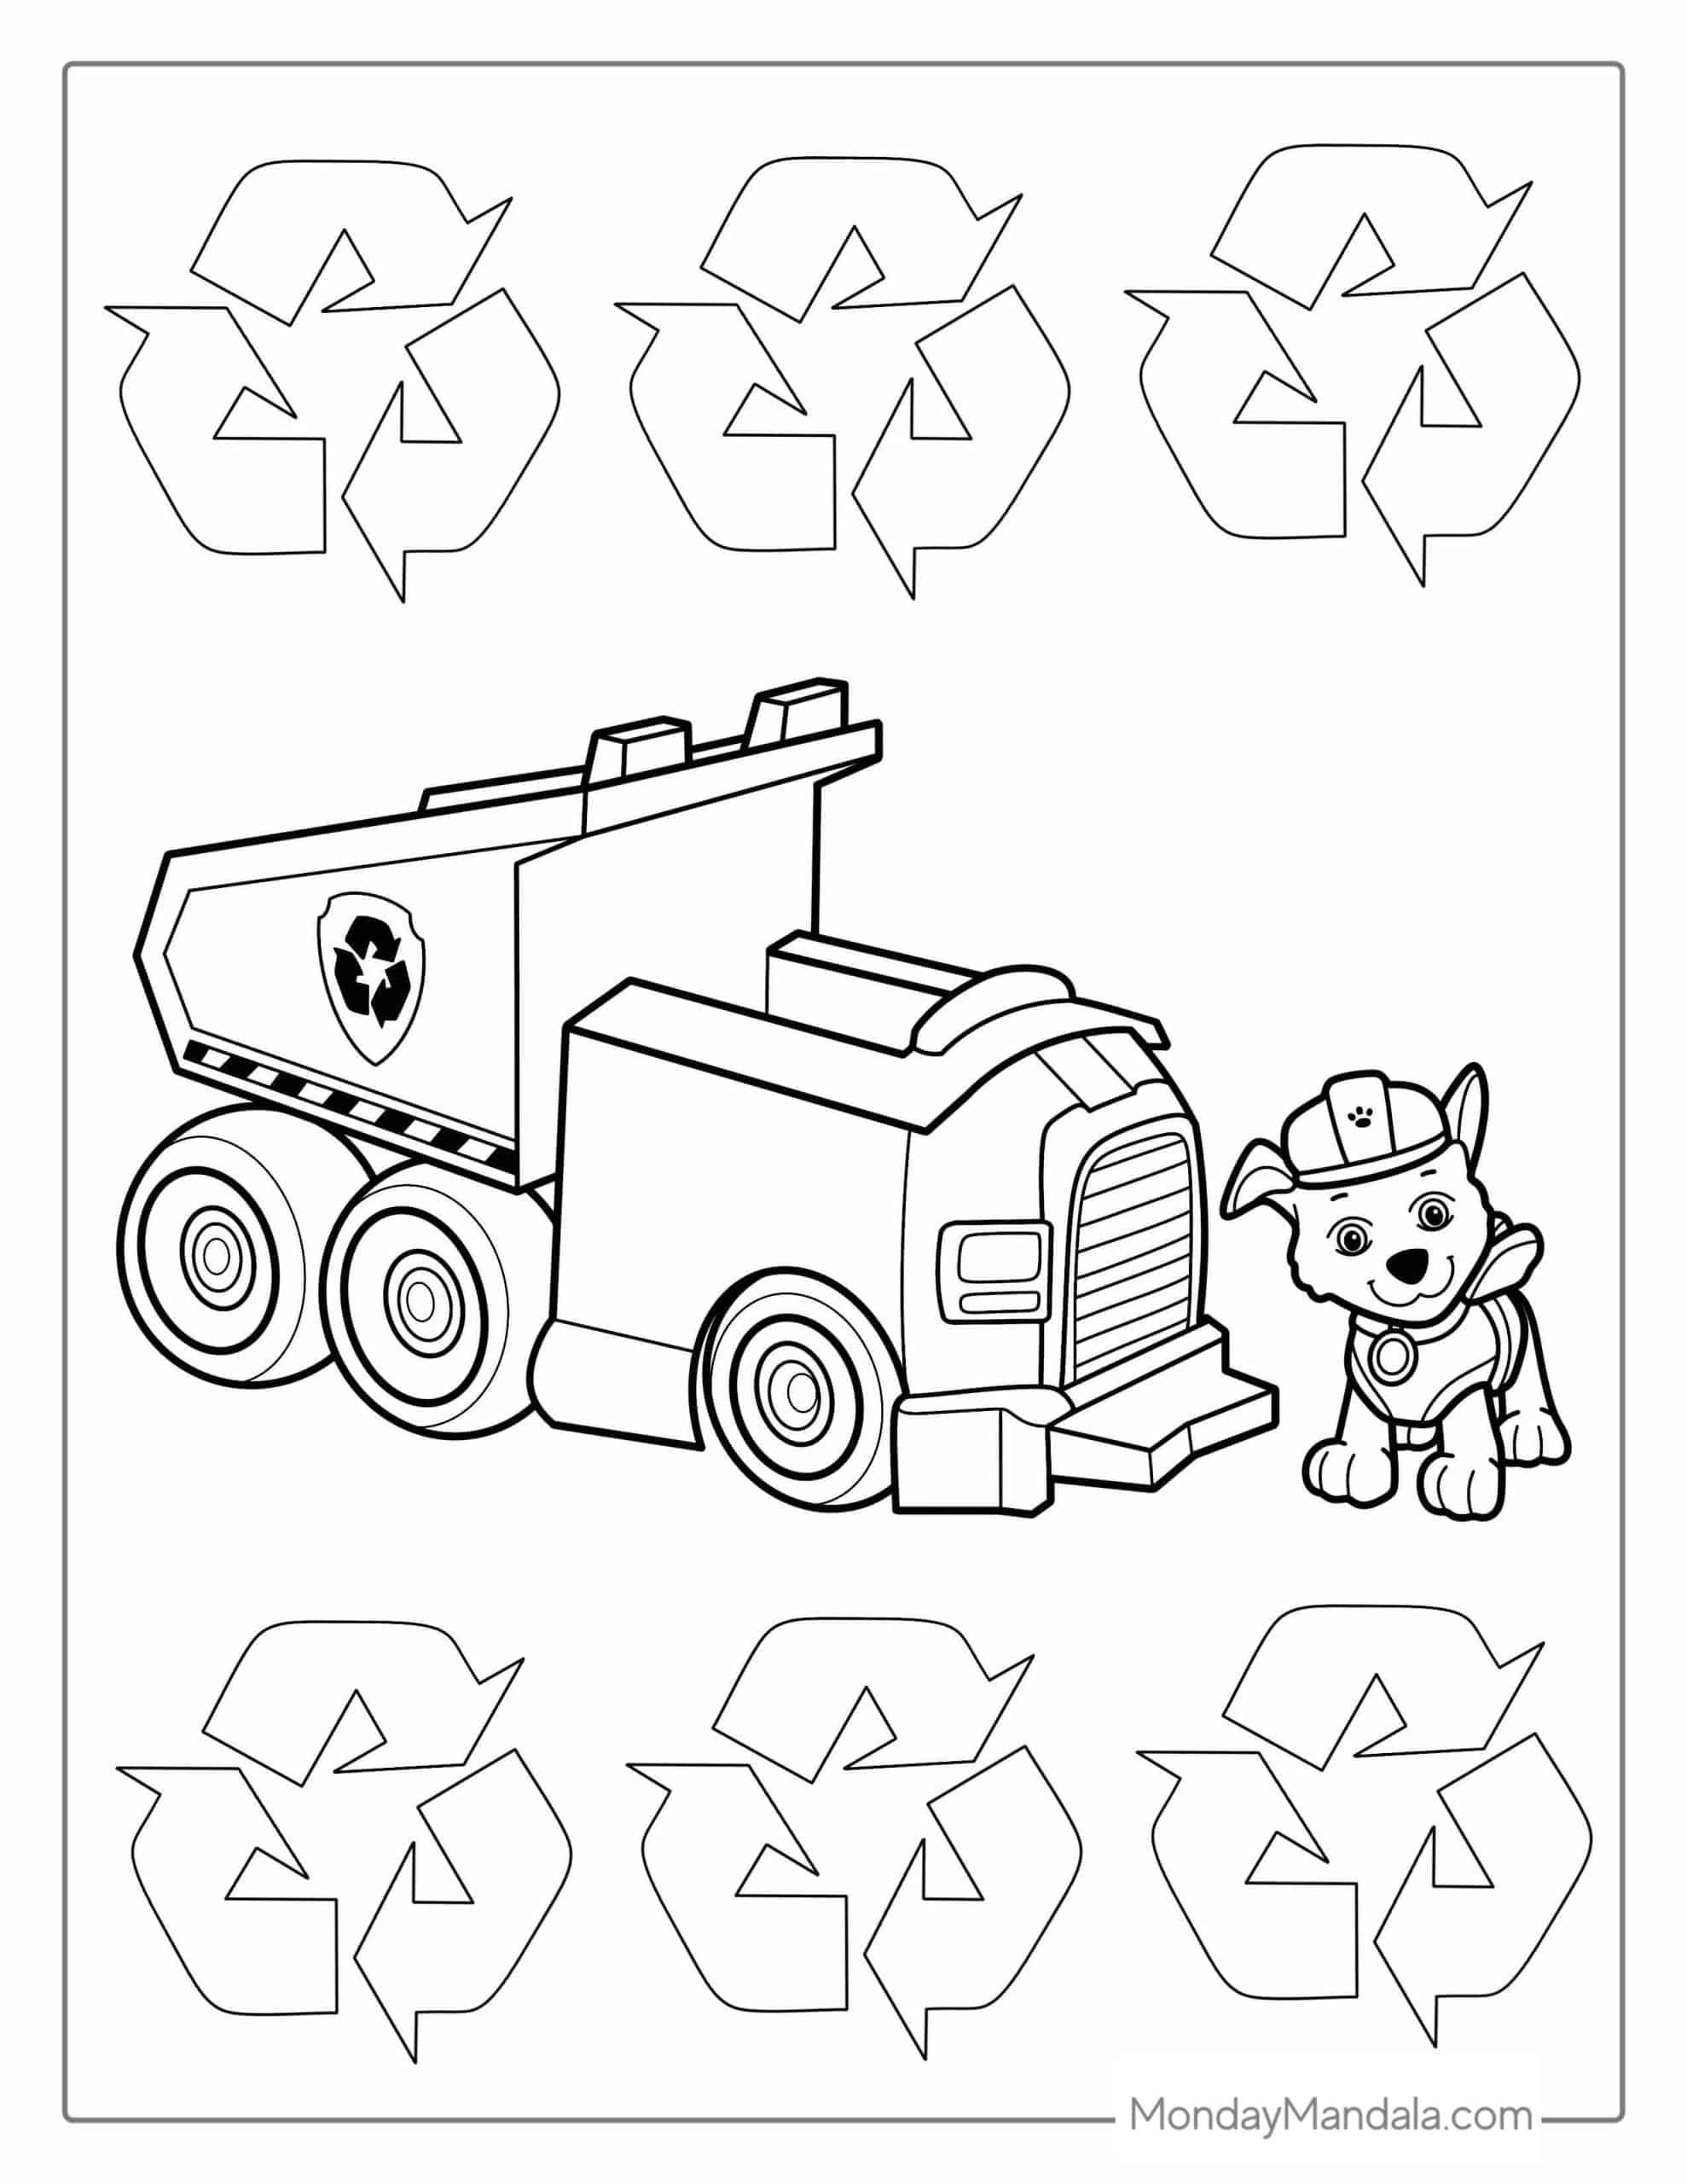 Garbage truck coloring pages free pdf printables truck coloring pages coloring pages free printable coloring pages